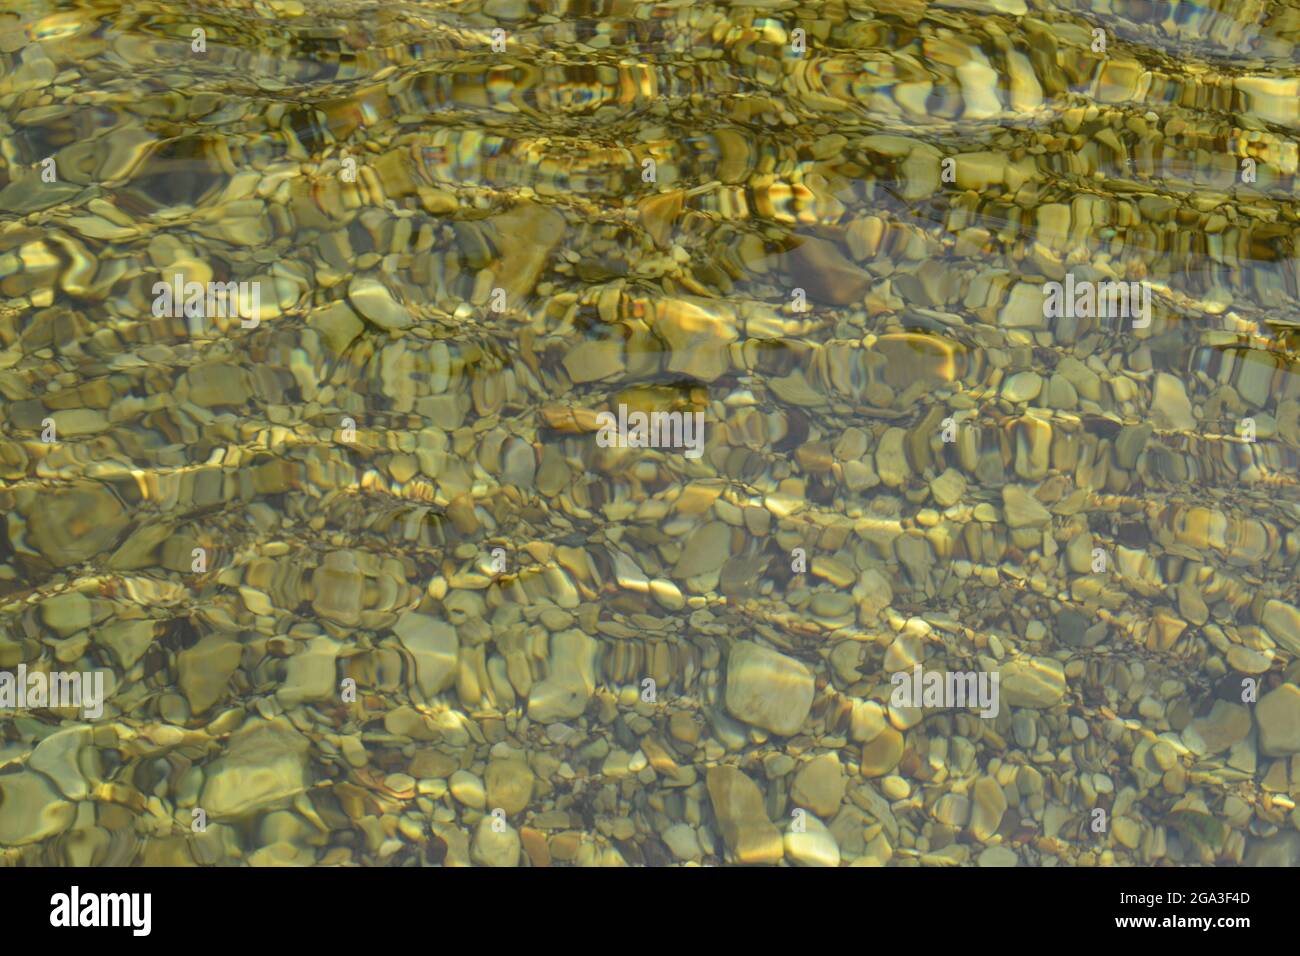 Transparent waters with round stones on a riverbed depicting the movement of the water. Capitolio, MG, Brazil Stock Photo